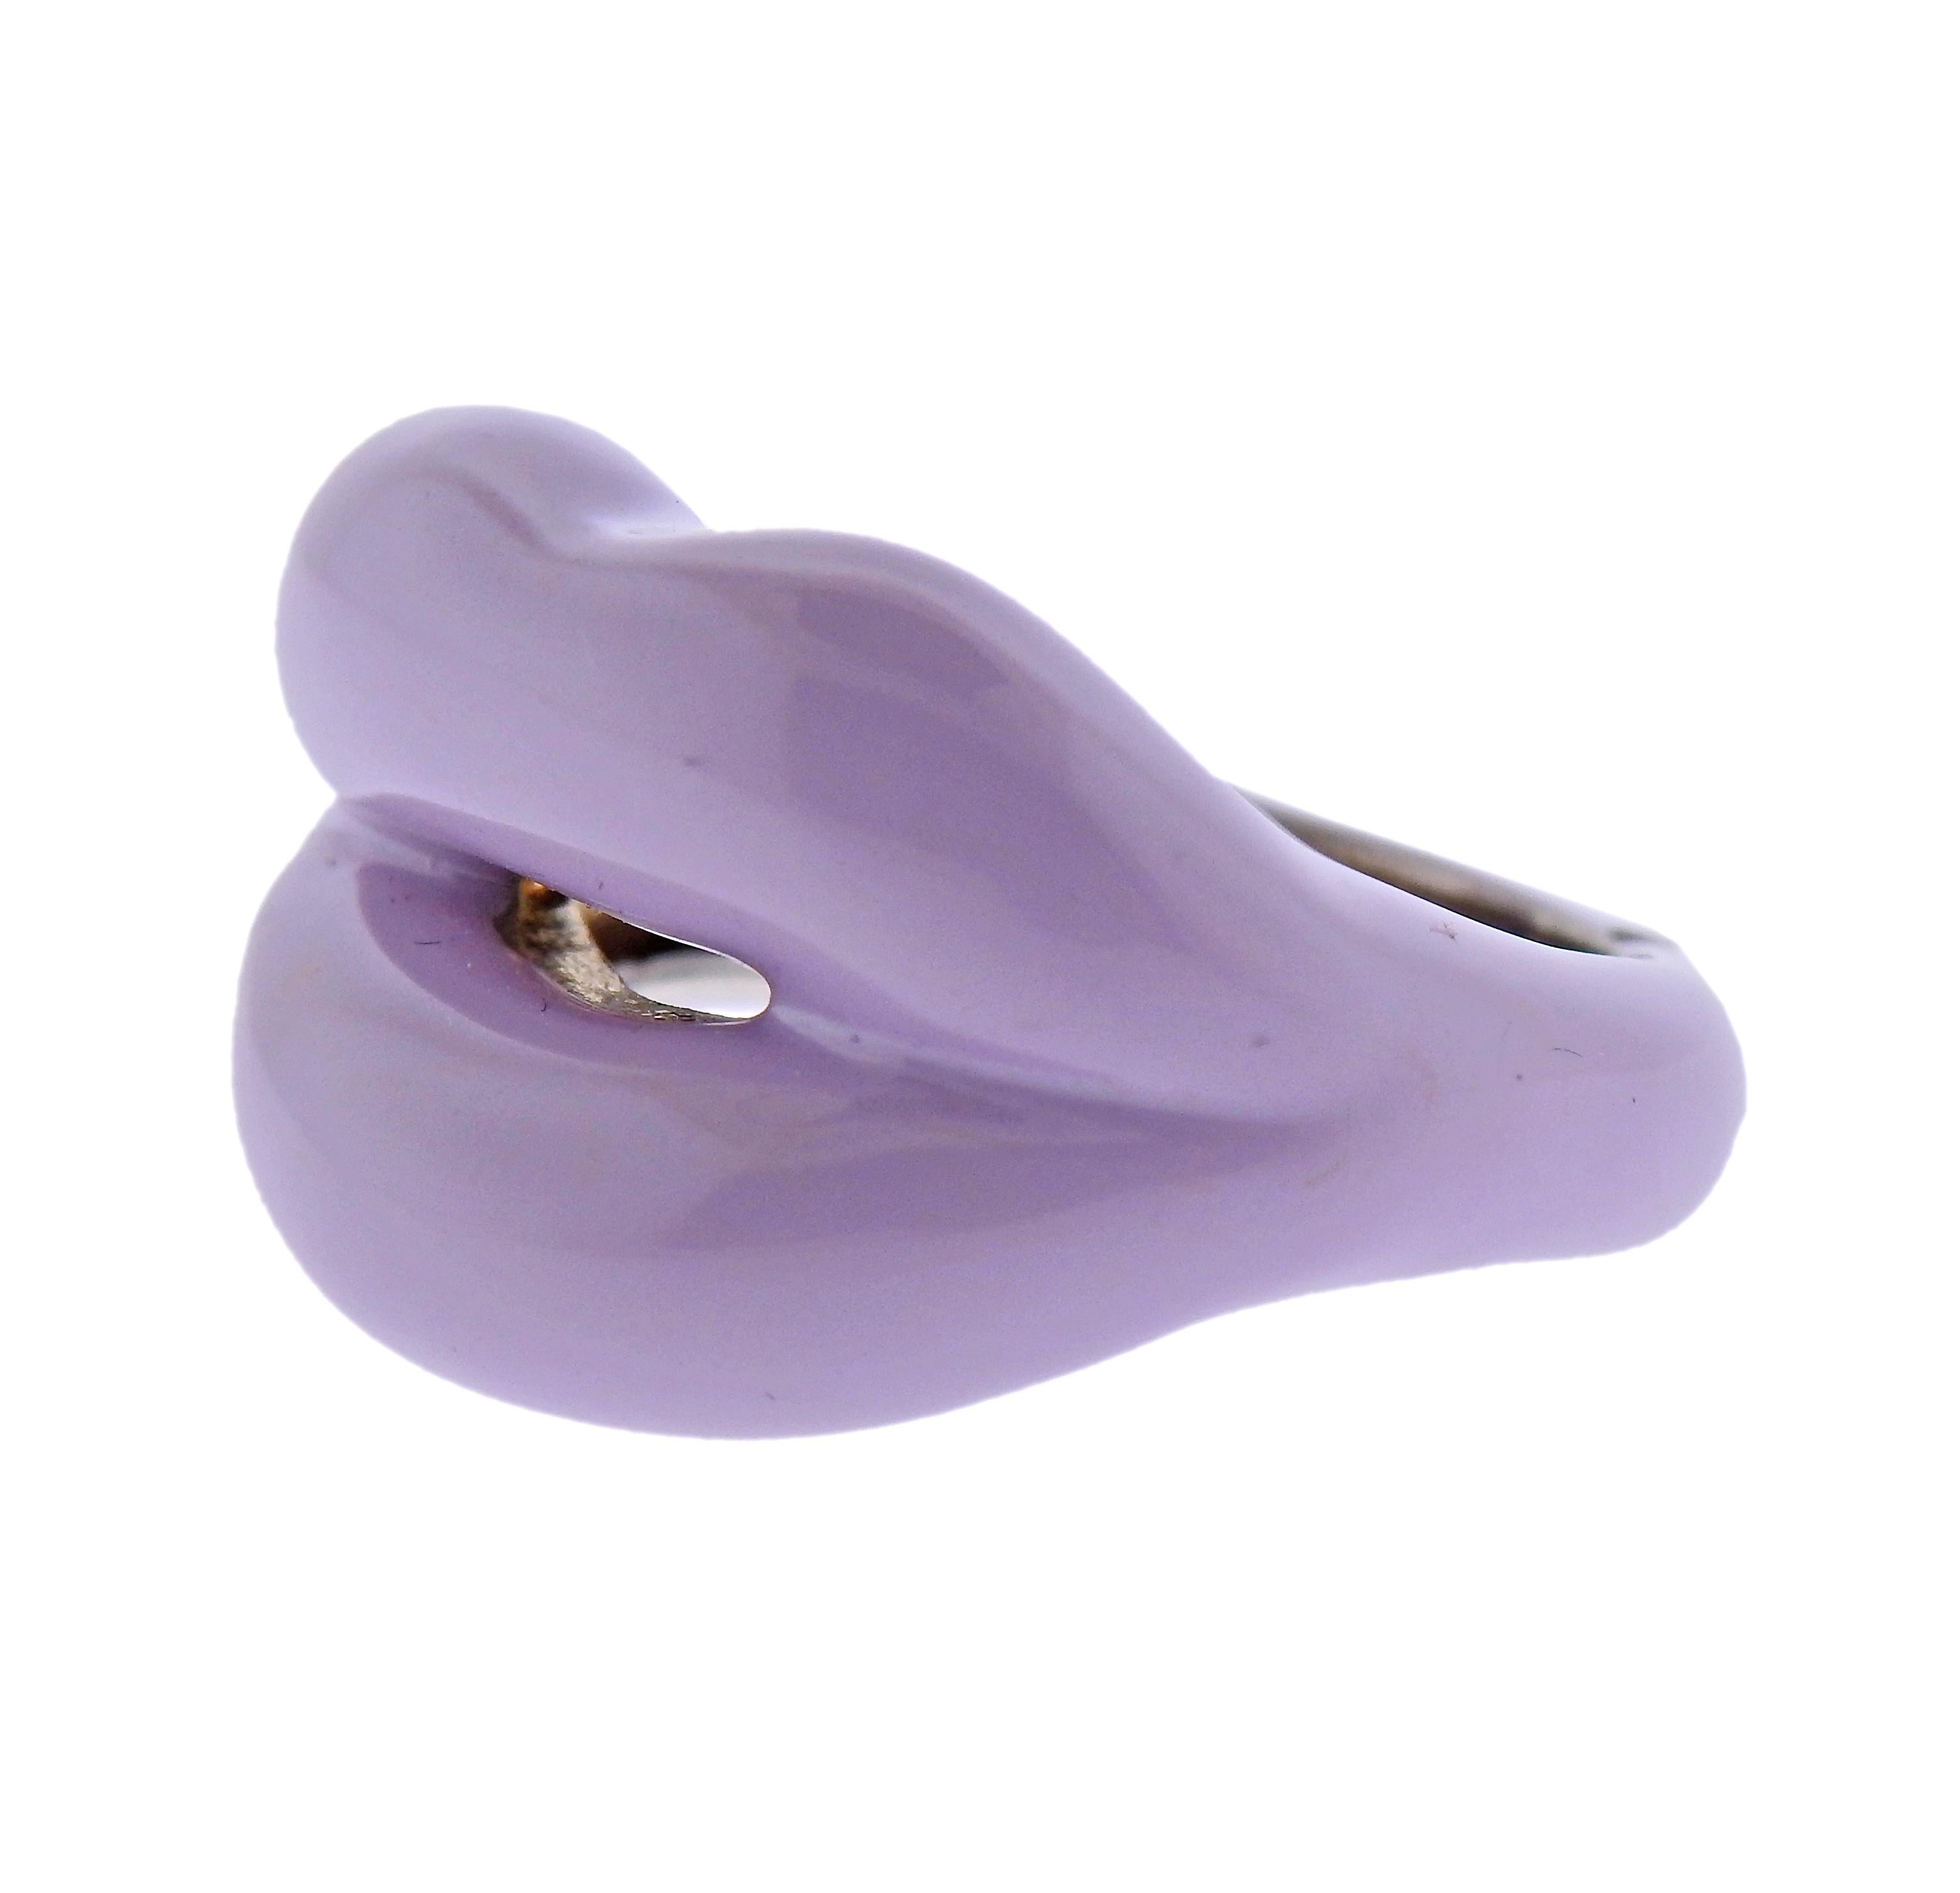 New with tag, sterling silver lips ring by Solange Azagury-Partridge, with lavender enamel. Ring size 7, ring top is 16mm.  Marked with Maker's English marks and 925. Retail $1650. Weight - 12.5 grams.